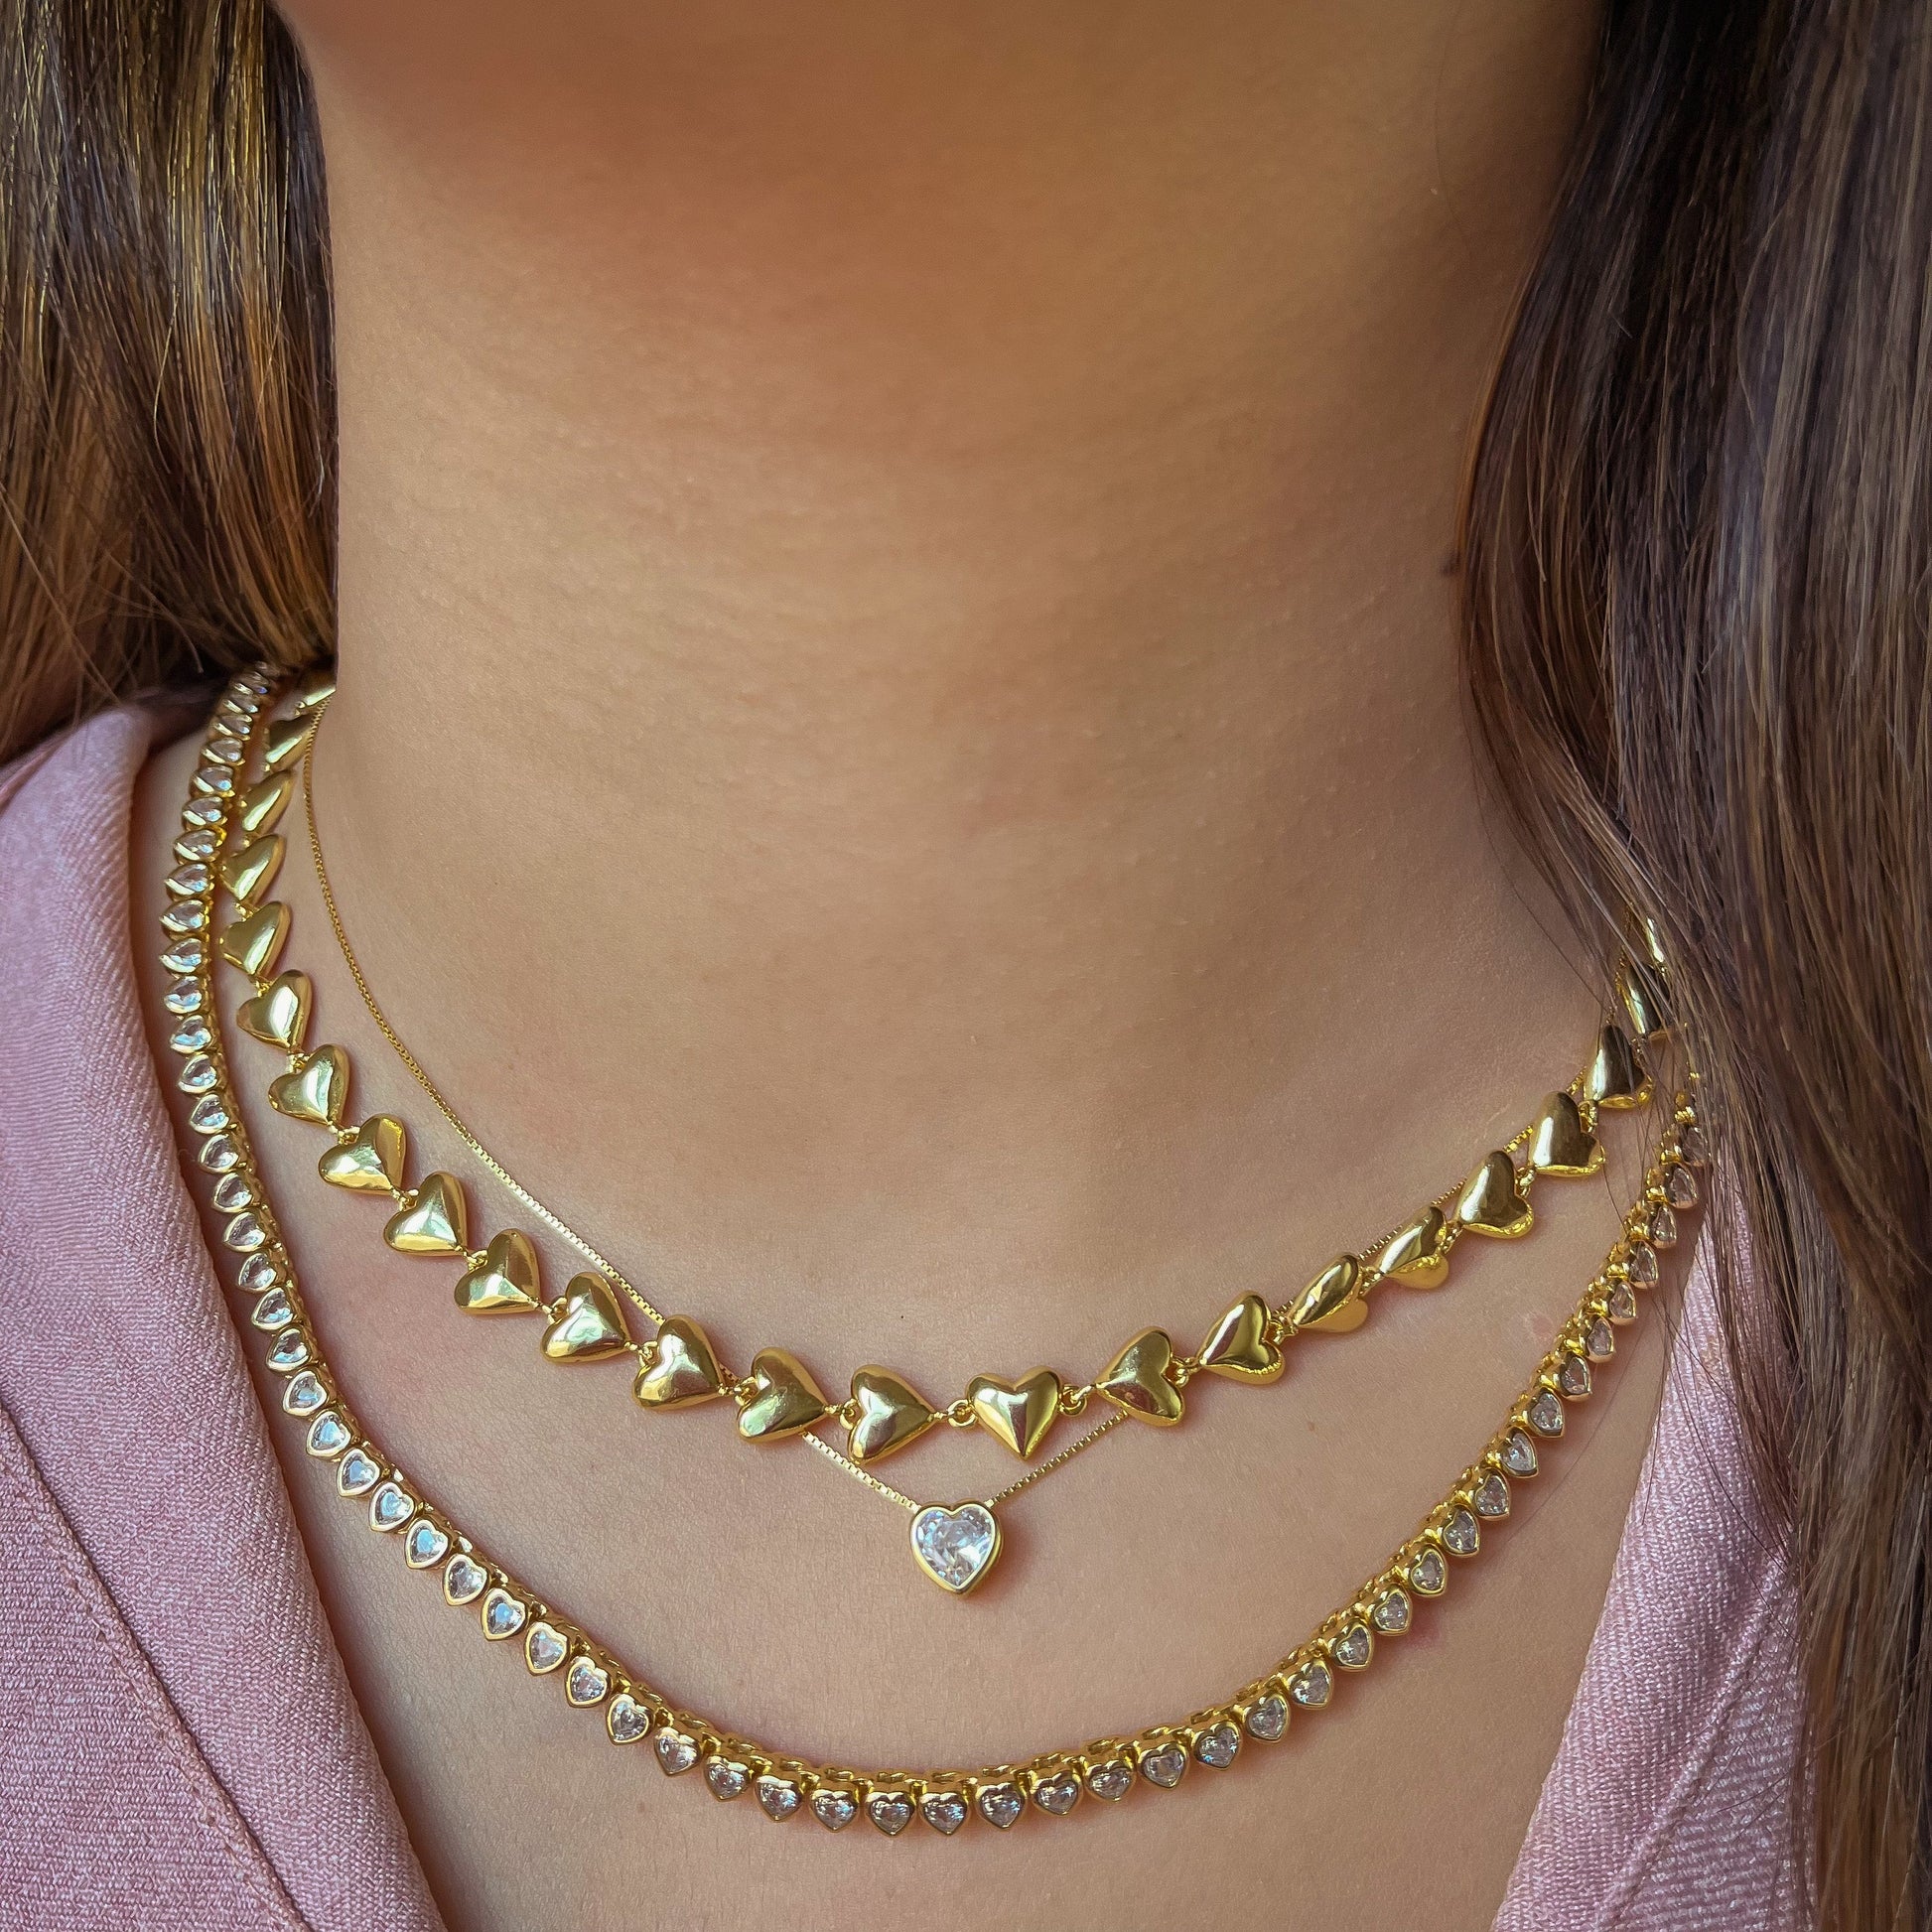 Love Choker Heart Charm Necklace-Get the perfect love choker now! Shop our heart charm necklace collection for stunning designs. Buy yours today and add a touch of love to your style! 🏆-Dazzledvenus